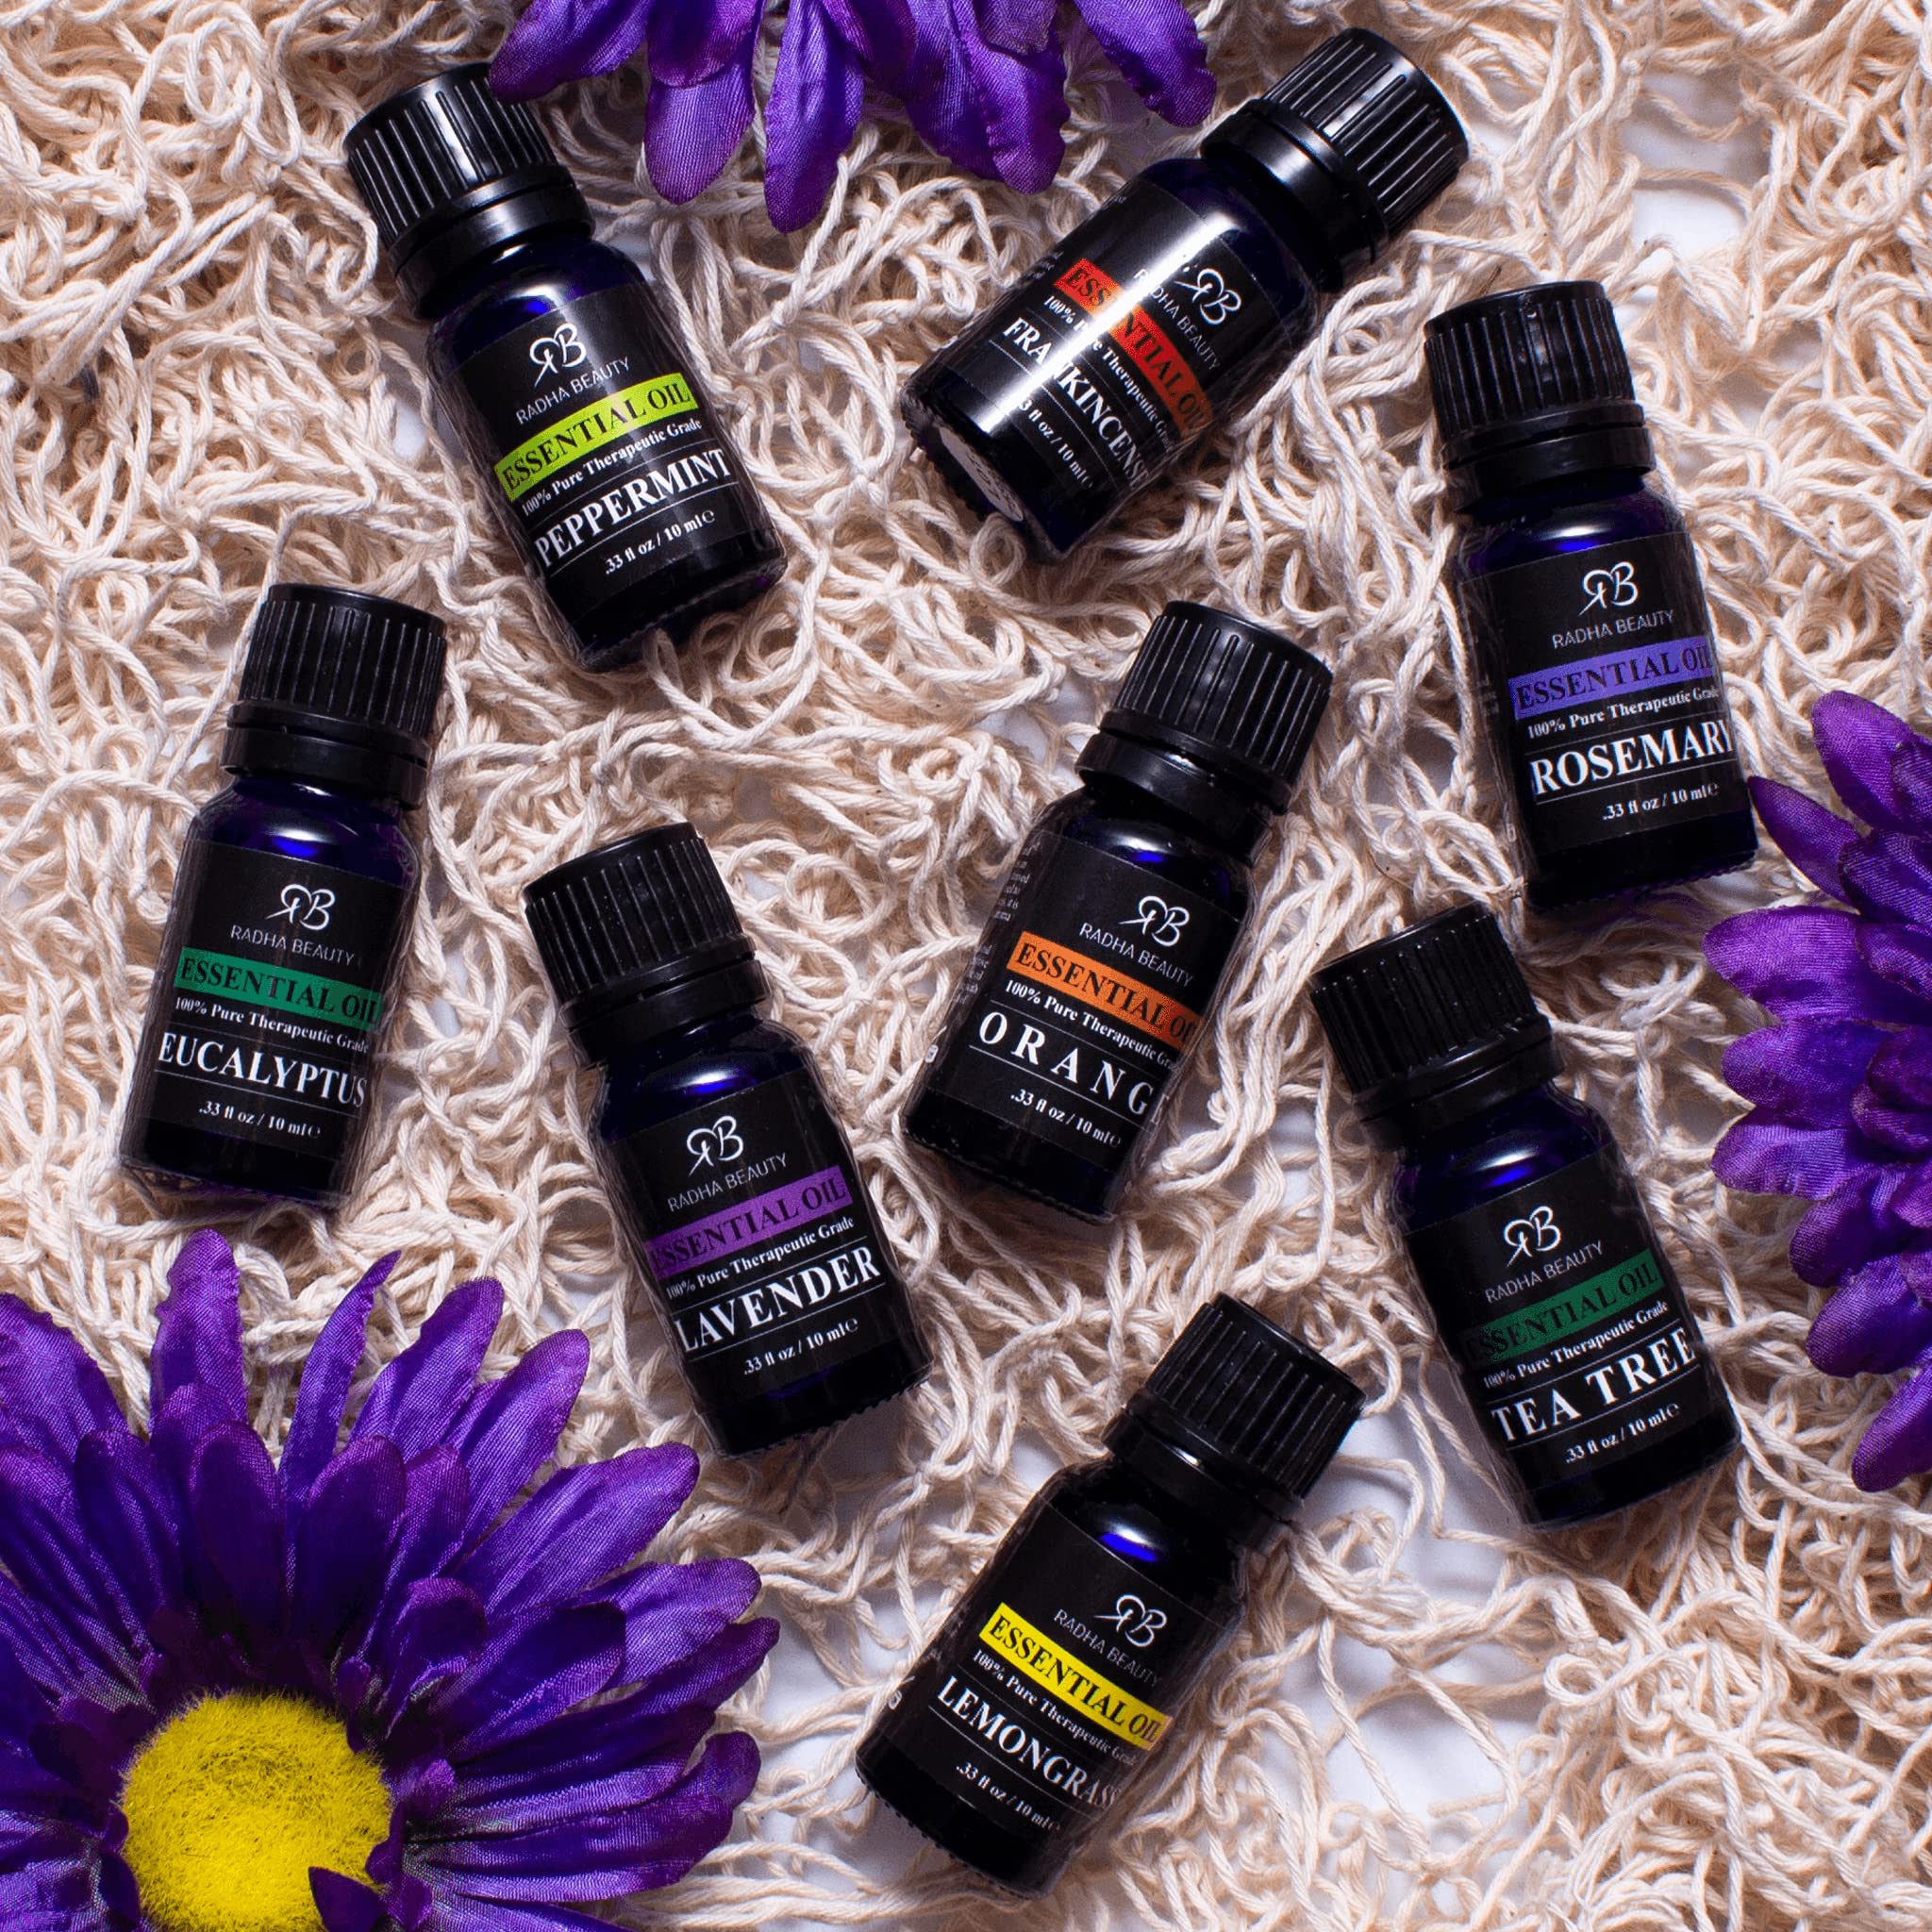 Essential Oil Set - Aromatherapy for Diffusers, Massage. Candle Making, Soaps, Bath Bombs. Top 8-10mL Oils: Lavender, Peppermint, Lemongrass, Tea Tree, Orange, Eucalyptus, Rosemary and Frankincense.